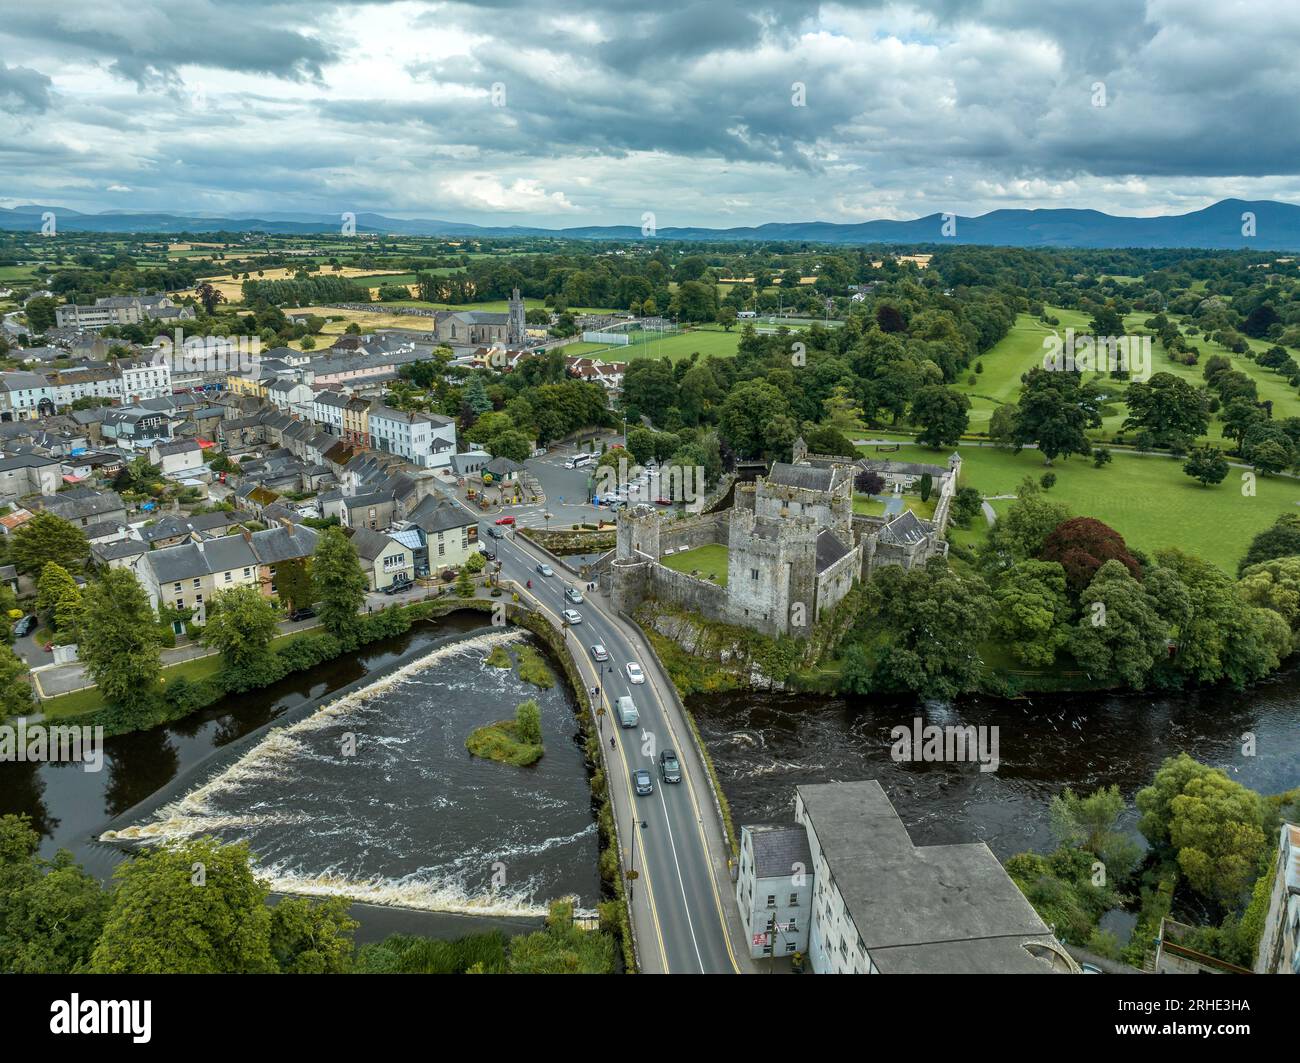 Aerial view of Cahir castle and town in Ireland with Tower House, outer castle, circular, rectangular towers, banquette hall, guarding the crossing Stock Photo